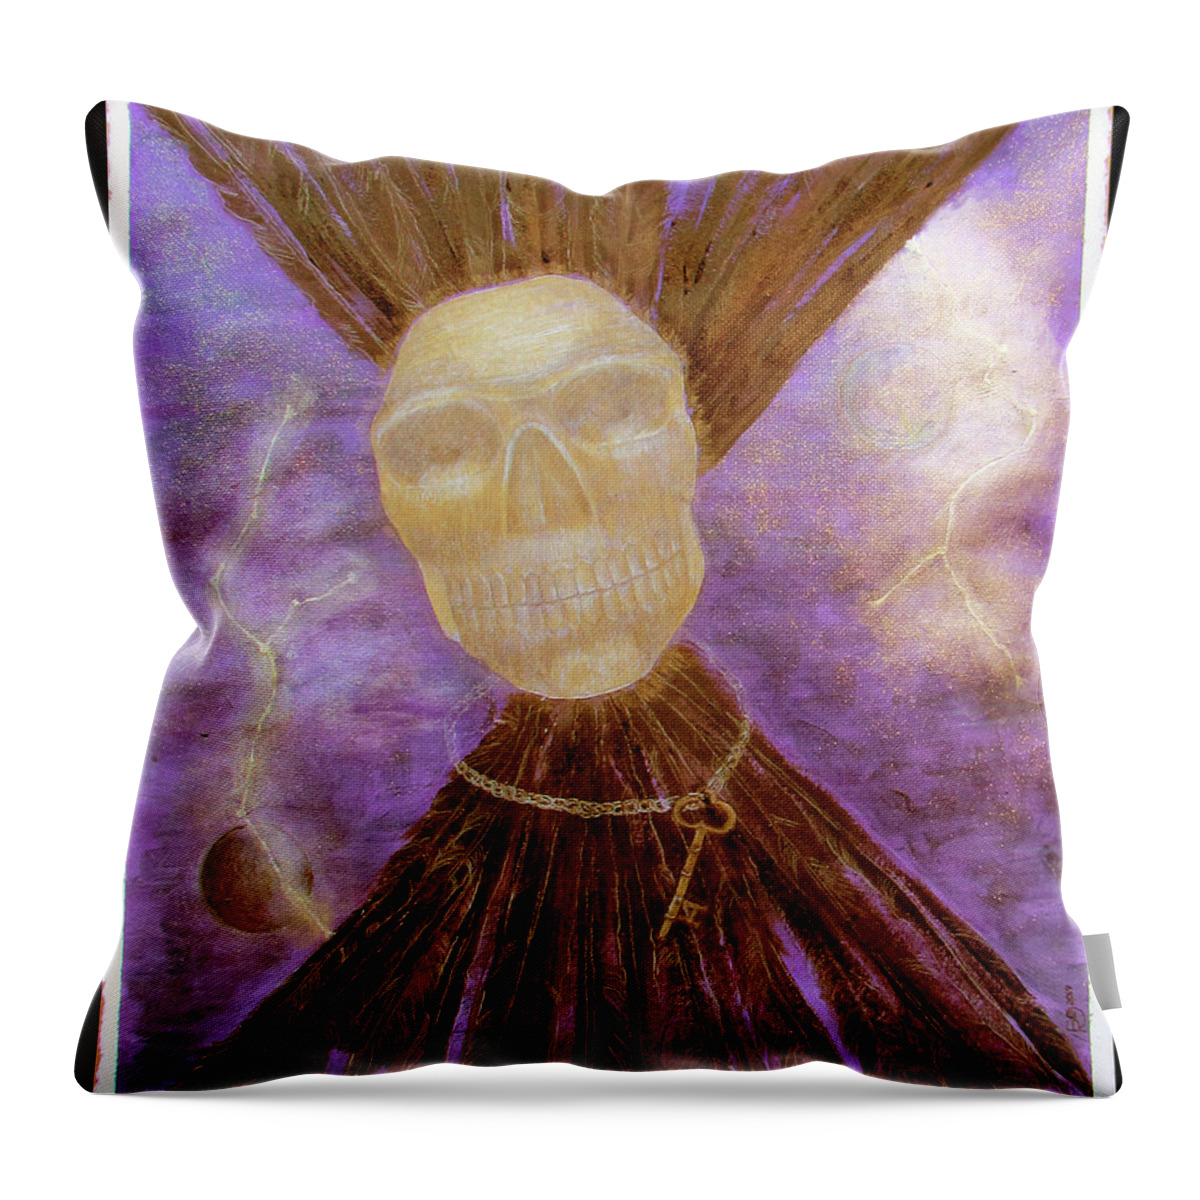 Obsidian Skull Throw Pillow featuring the painting Compelling Communications with a Large Golden Obsidian Skull by Feather Redfox